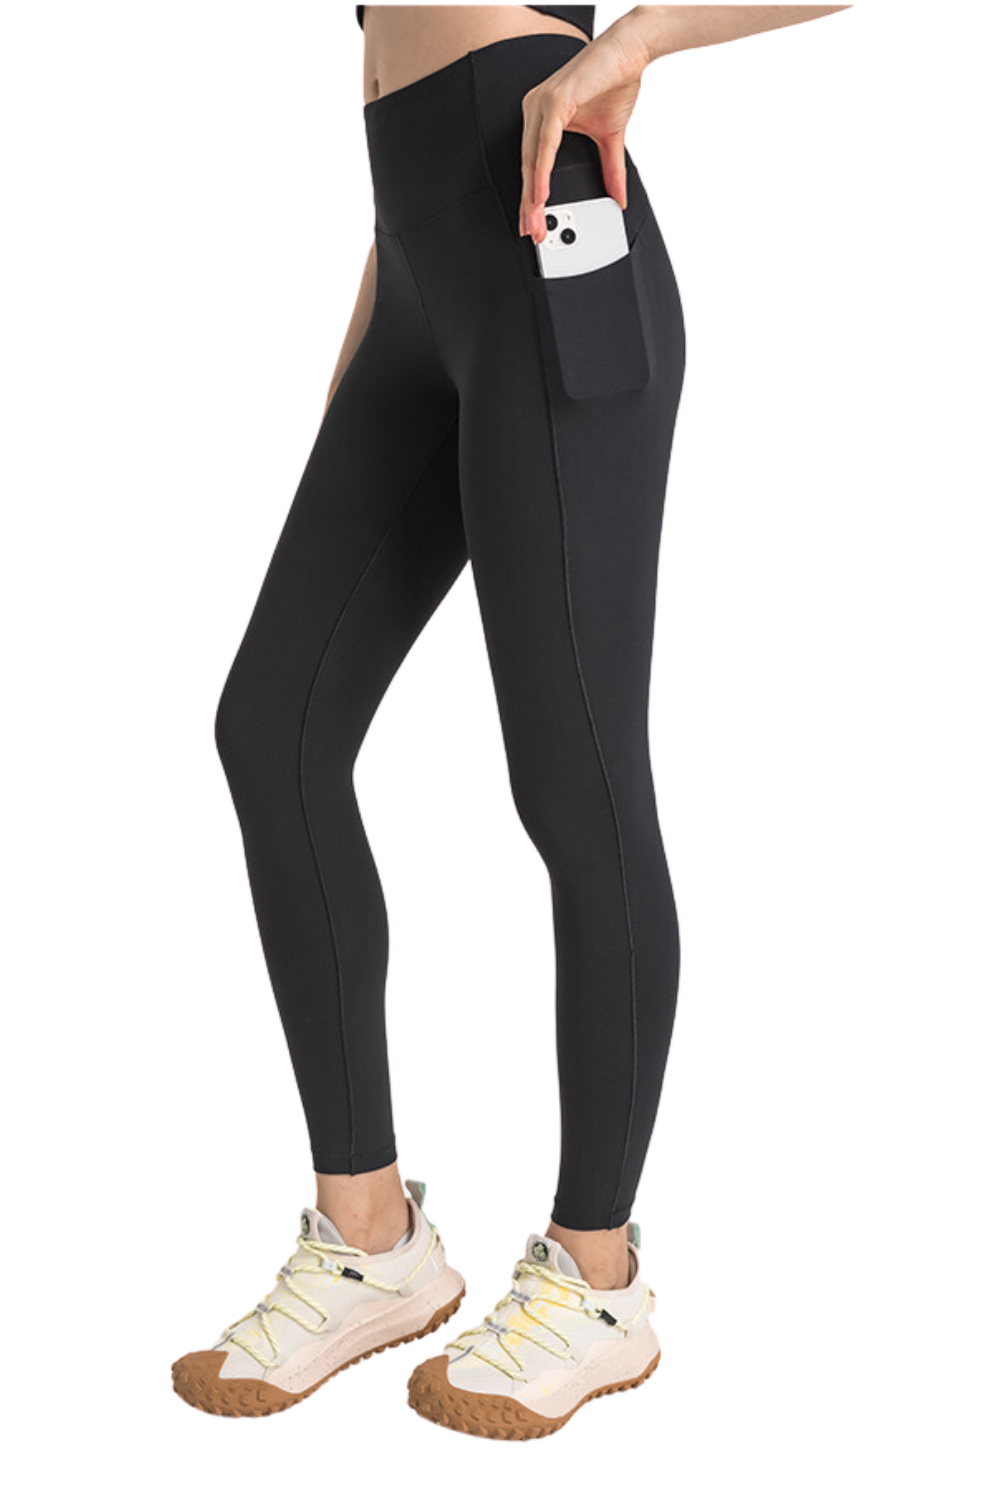 Black "Aria" Luxe and Lift High Rise Pocket Leggings